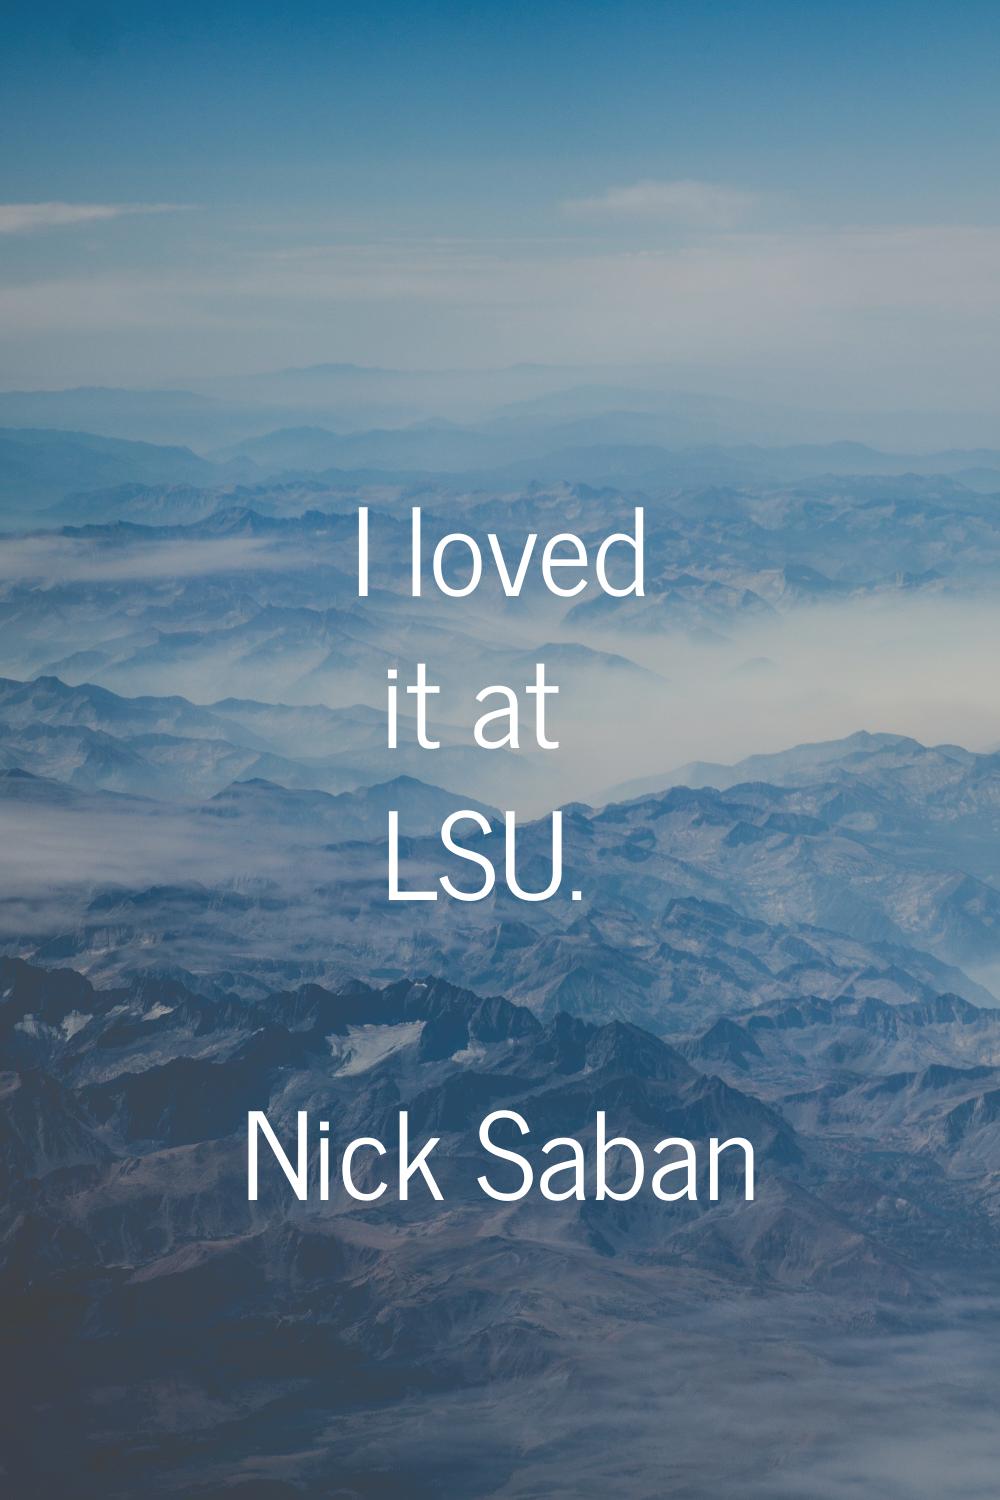 I loved it at LSU.